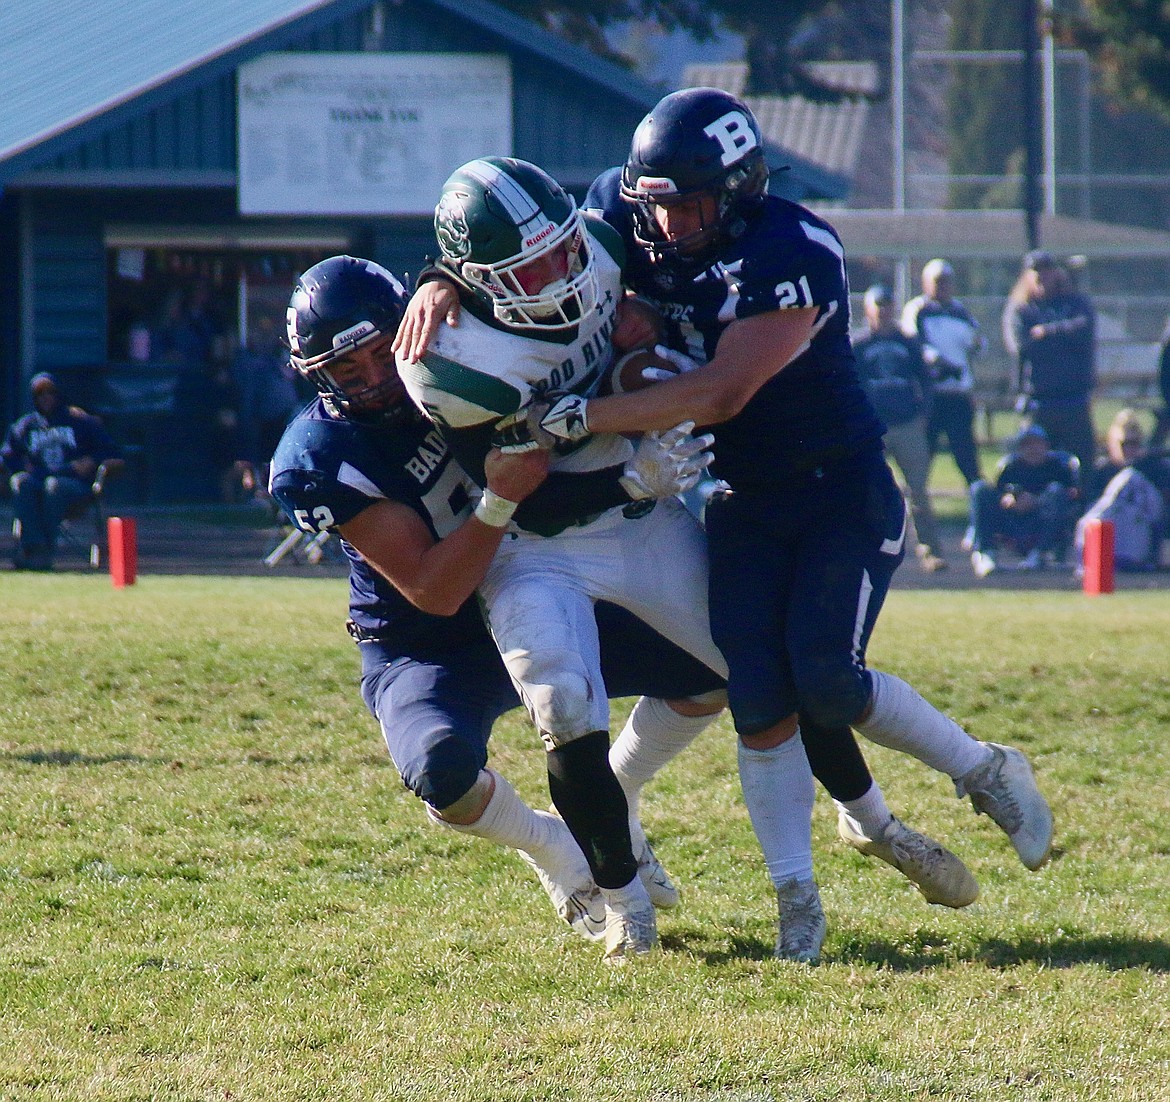 Wood River player tackled by #52 Dillion Mai and #21 Cleo Henslee at the playoff game.